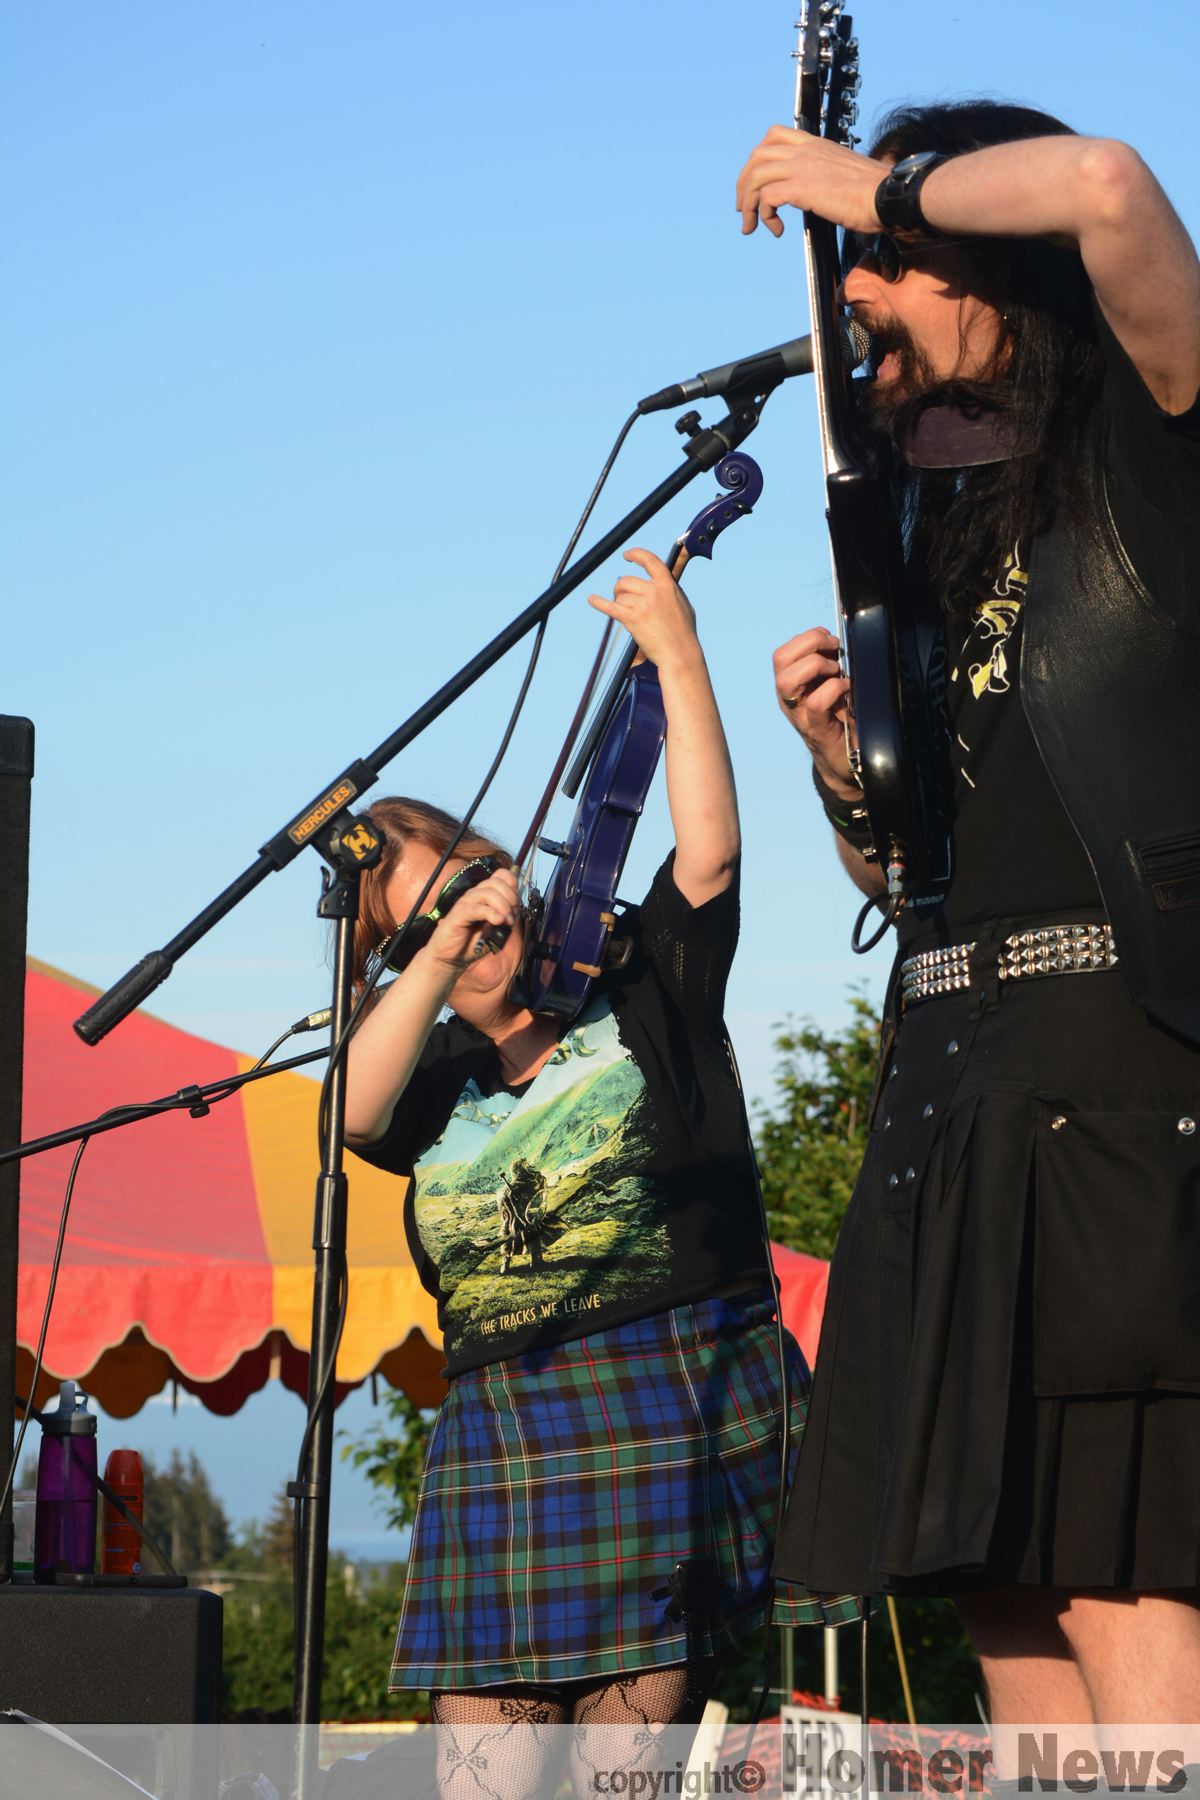 Kathy Buys, left, on fiddle, and Lief Sorbye, right, on mandolin, perform with Tempest last Friday at Karen Hornaday Park for the opening of CeltFest and the Highland Games. They played several songs based on Robert Burns poems. For photos and results of the games, see page 12.-Photo by Michael Armstrong, Homer News